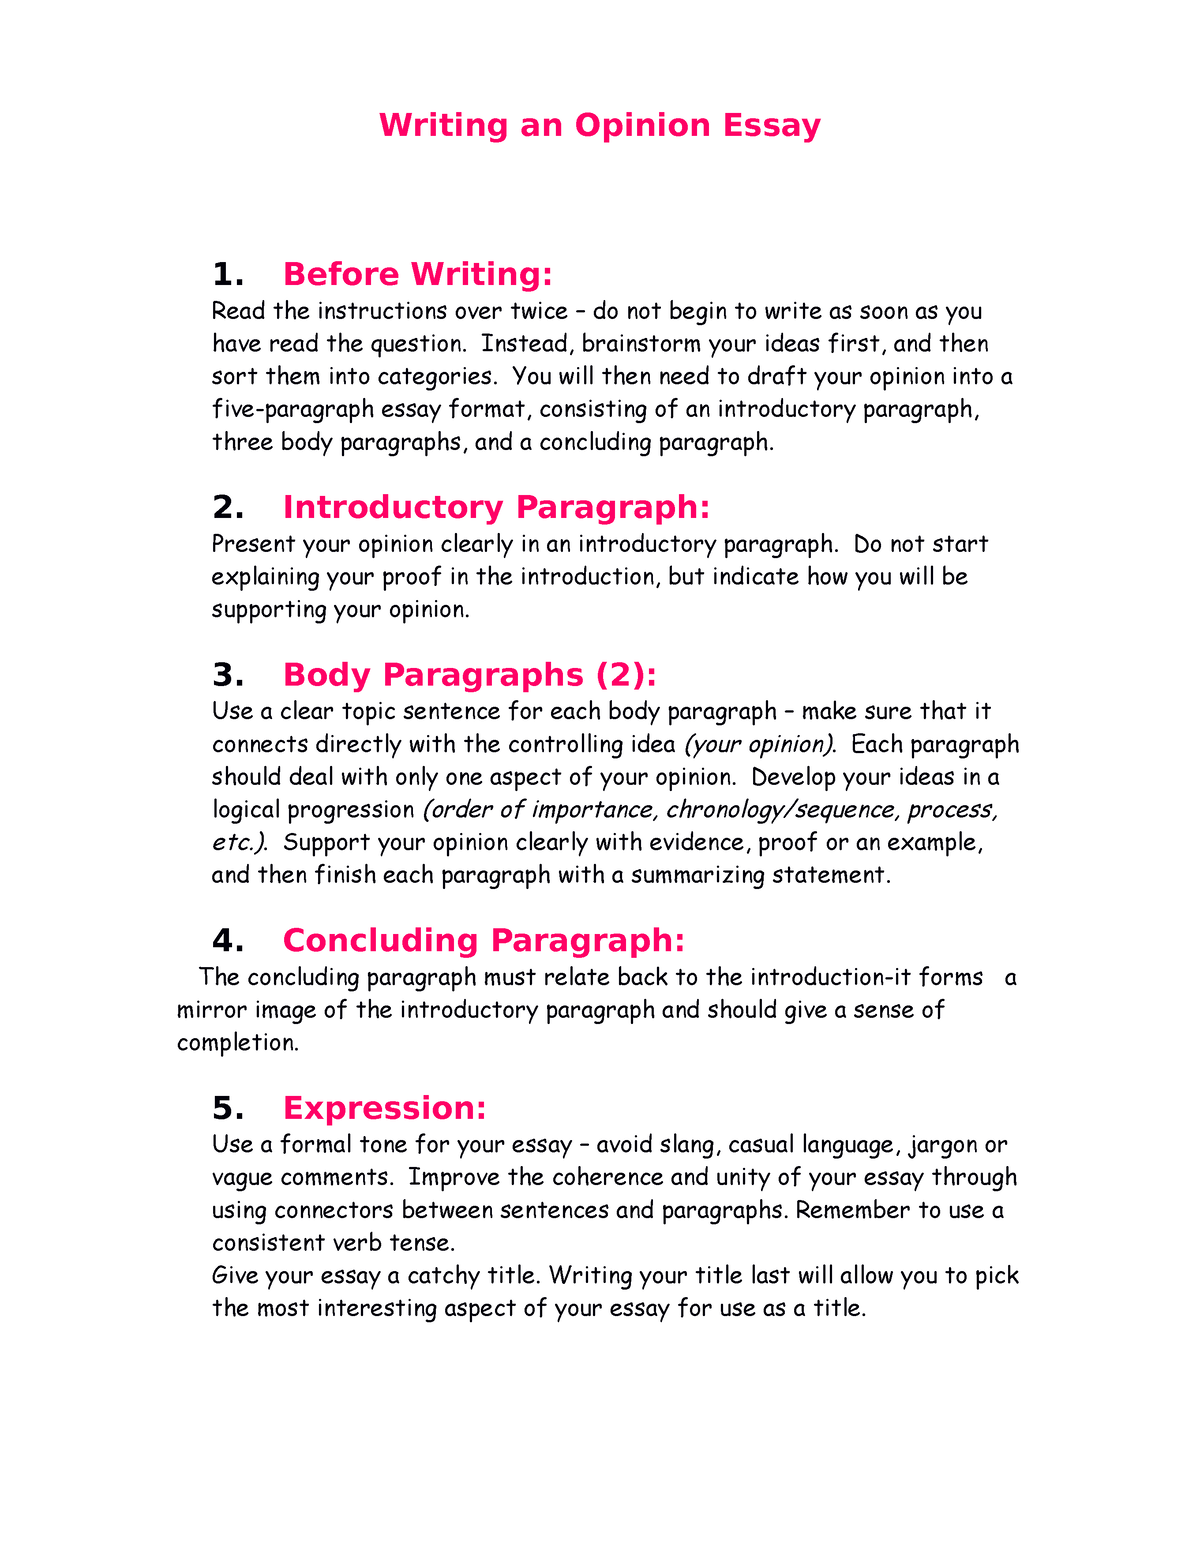 Expressing Opinion Essay 2 - Writing an Opinion Essay 1. Before Writing ...